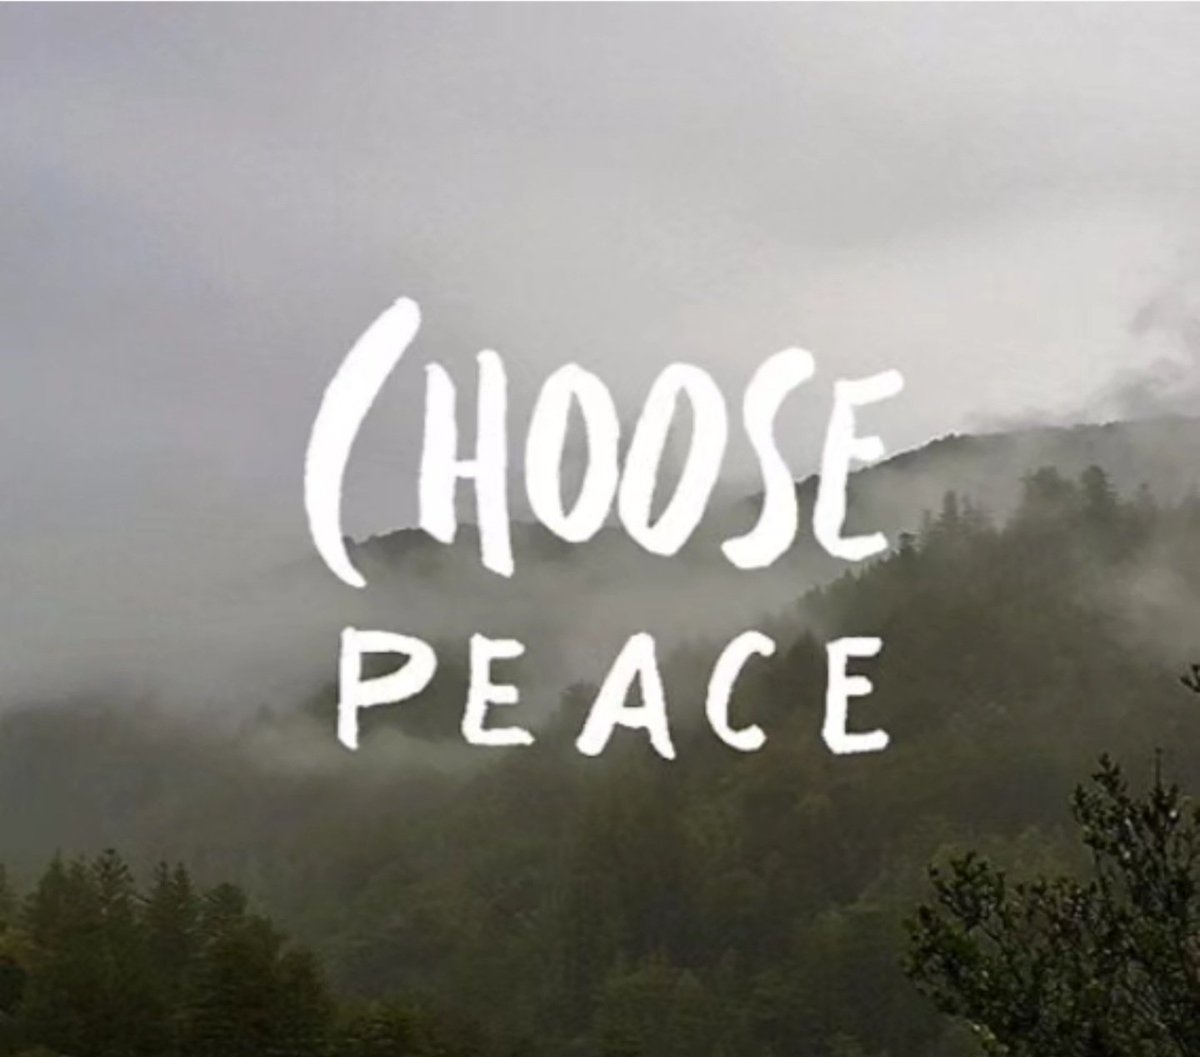 Good morning! As much as lies within you, be at peace with everyone. Choose peace. Live peaceably #peace #choosepeace #helpinthehouse #Solutionist #iamaningredient #JusticeGeneral